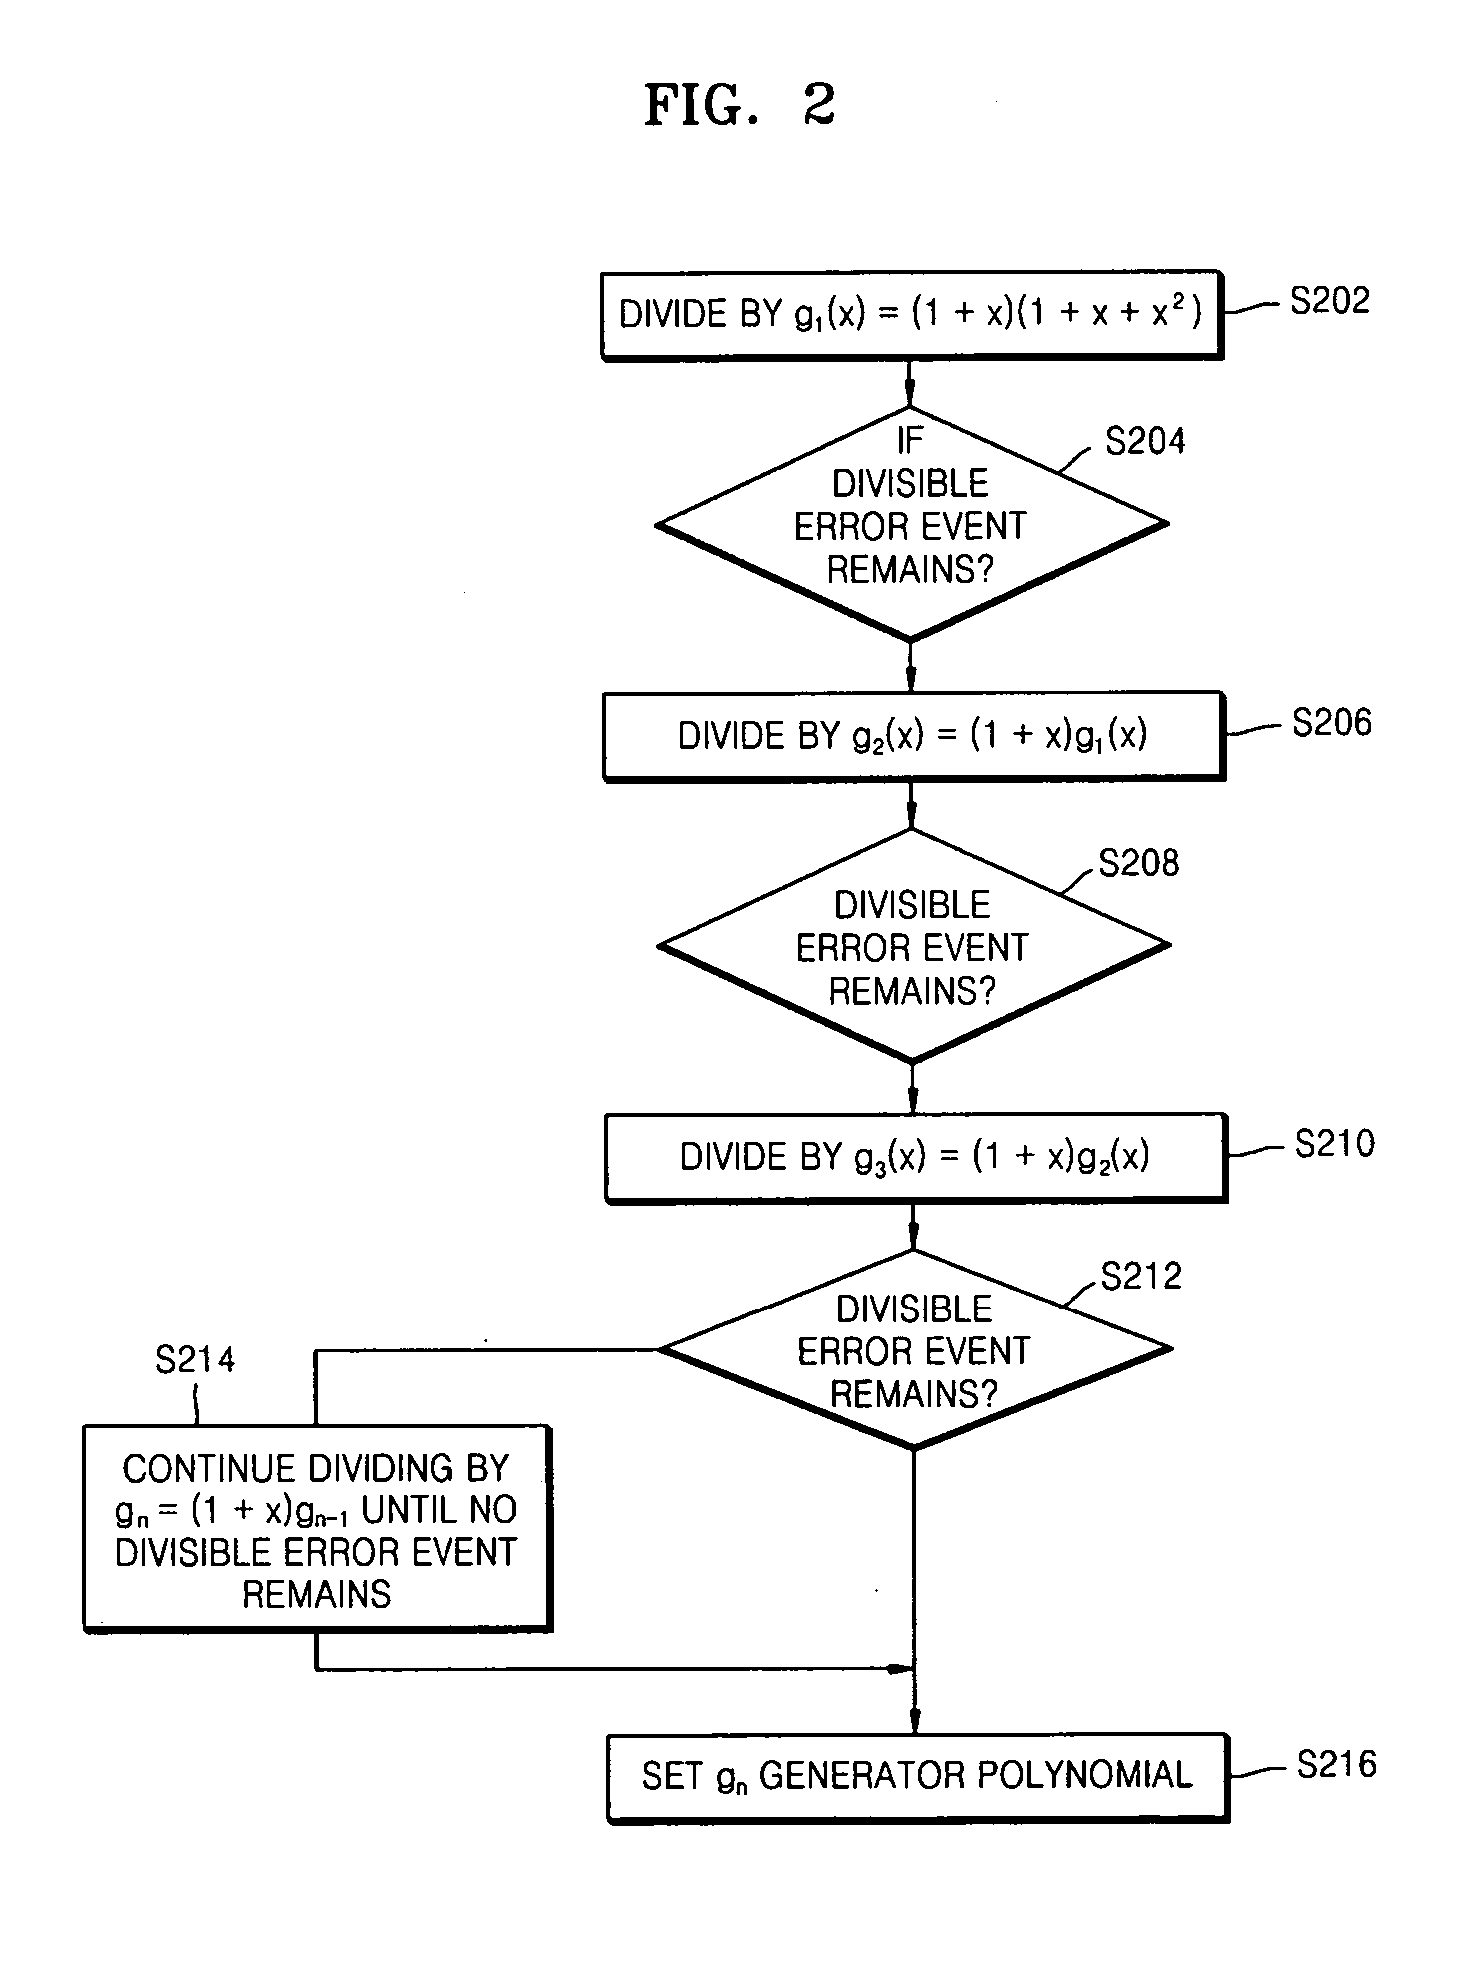 Method of detecting and correcting a prescribed set of error events based on error detecting code